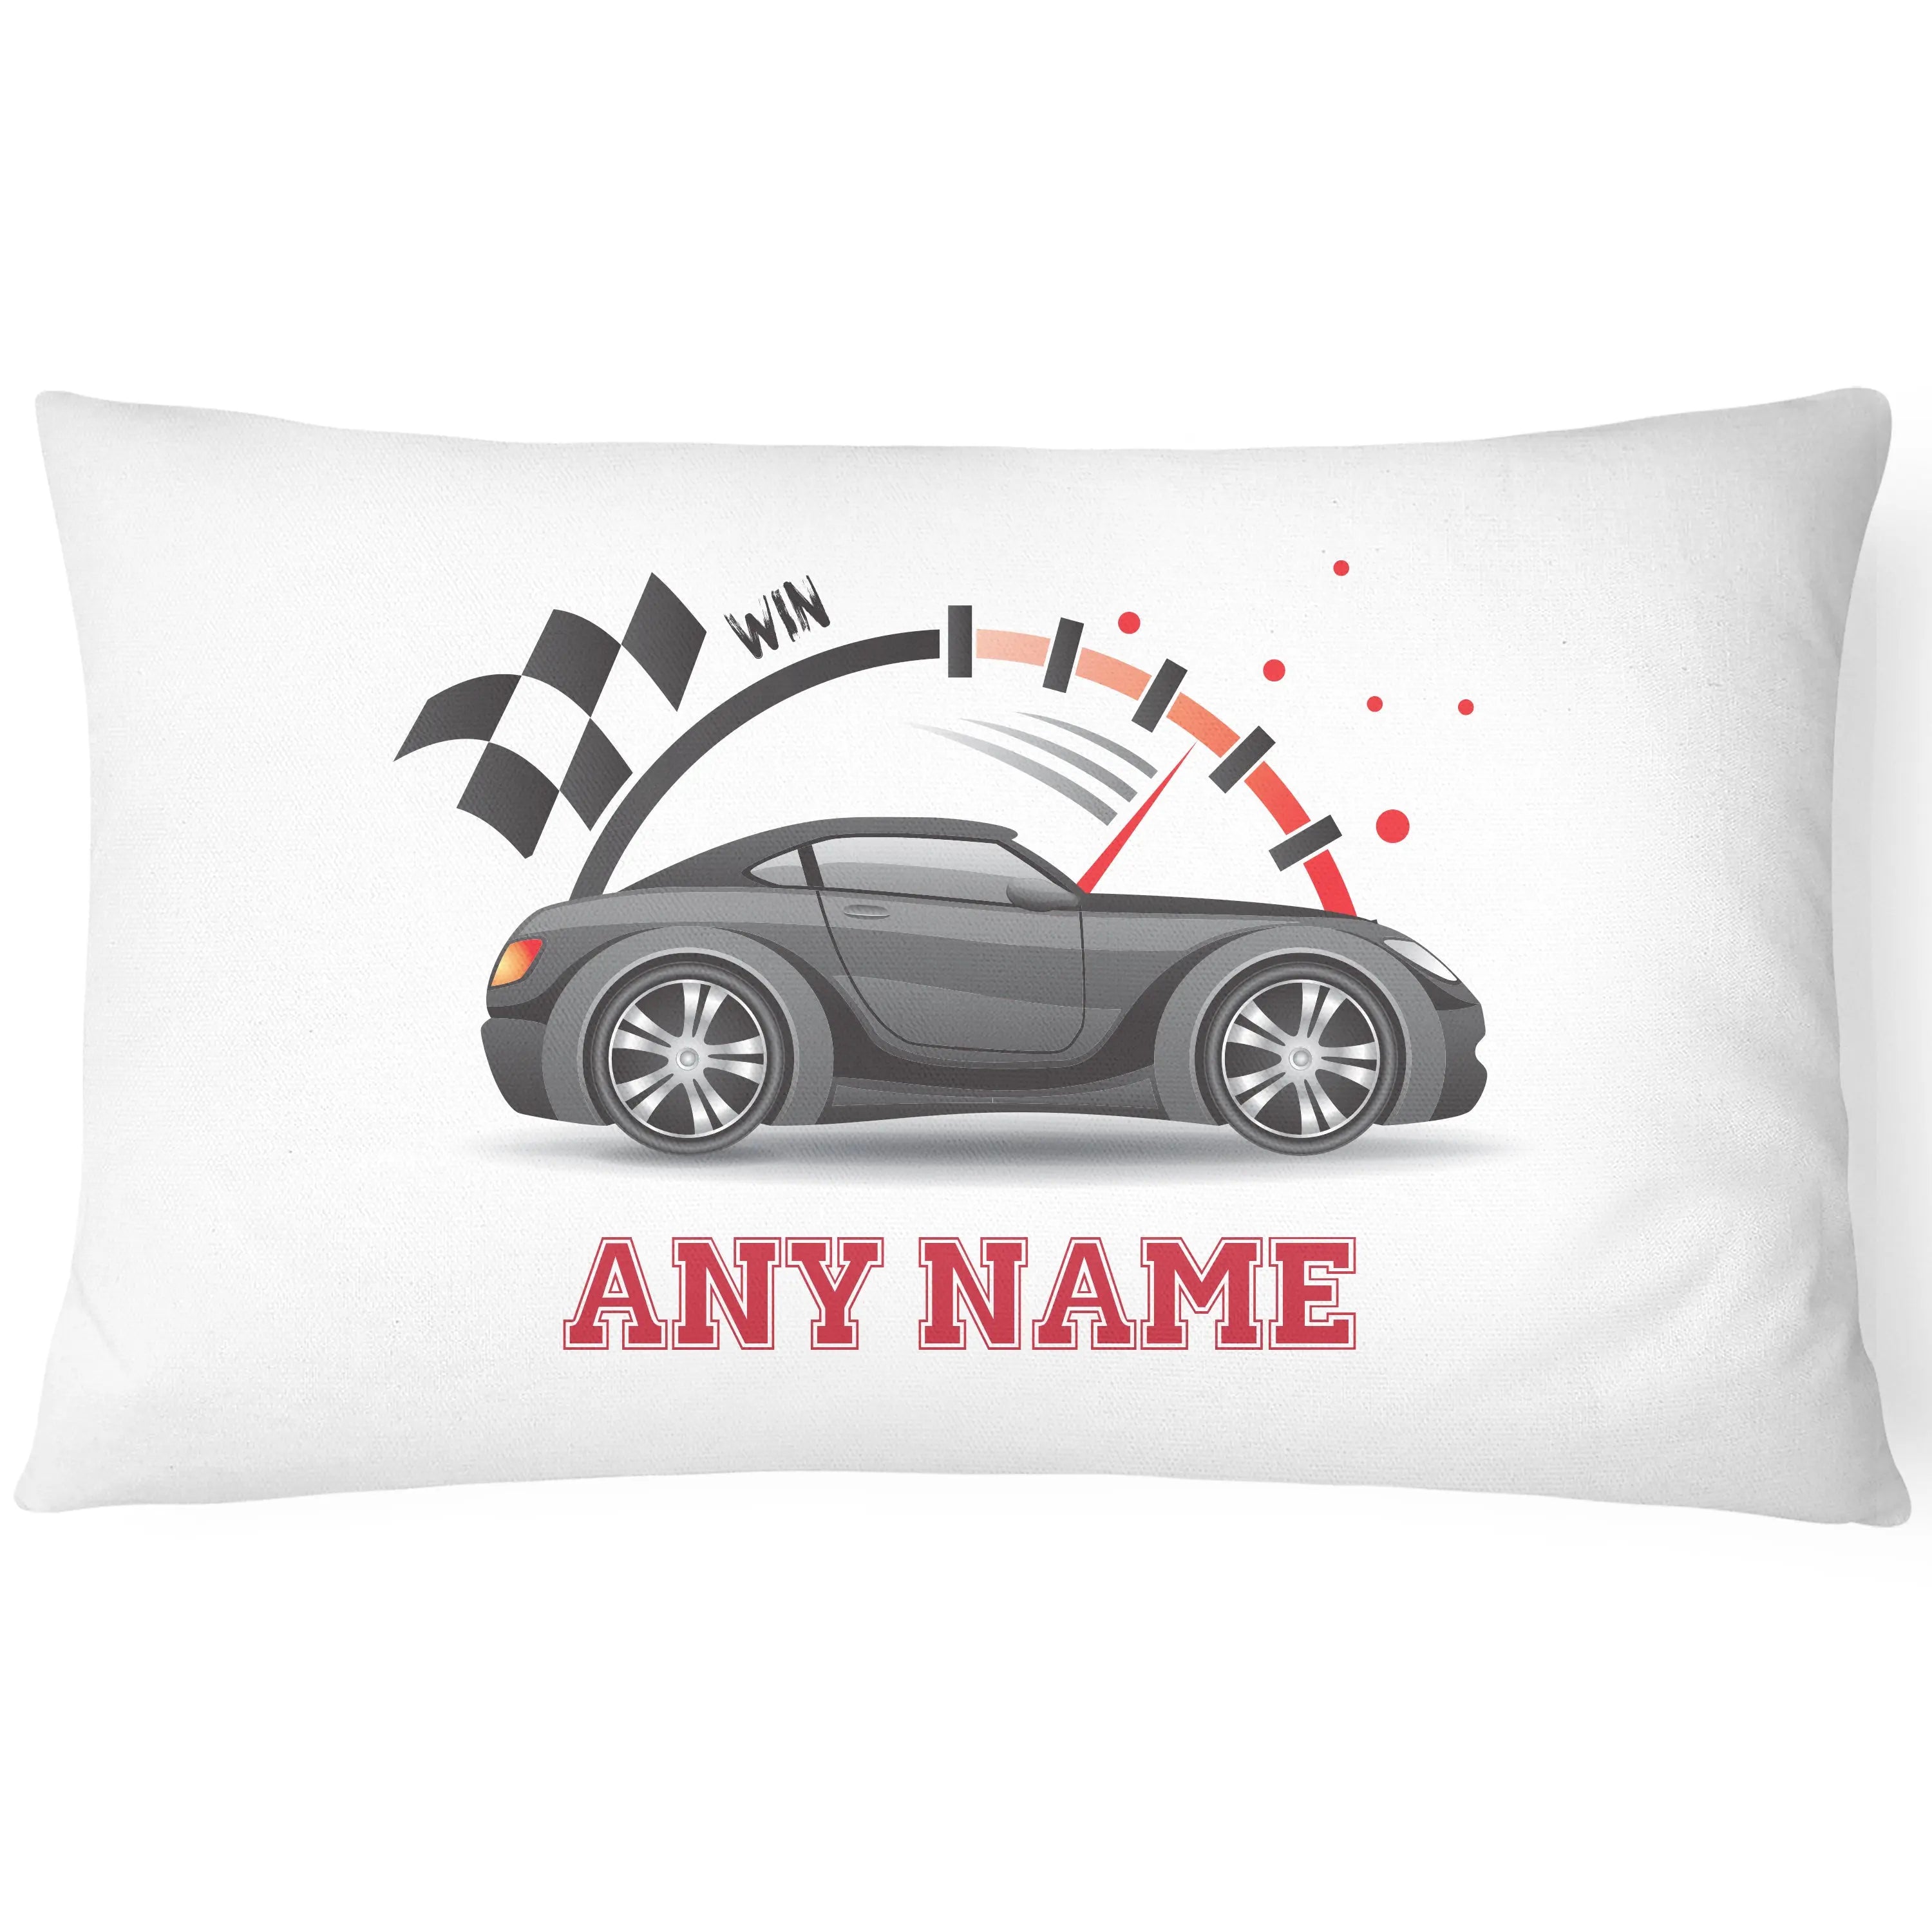 Race Car Pillowcase for Kids - Personalise With Any Name - Perfect Children's Gift - Matte - CushionPop